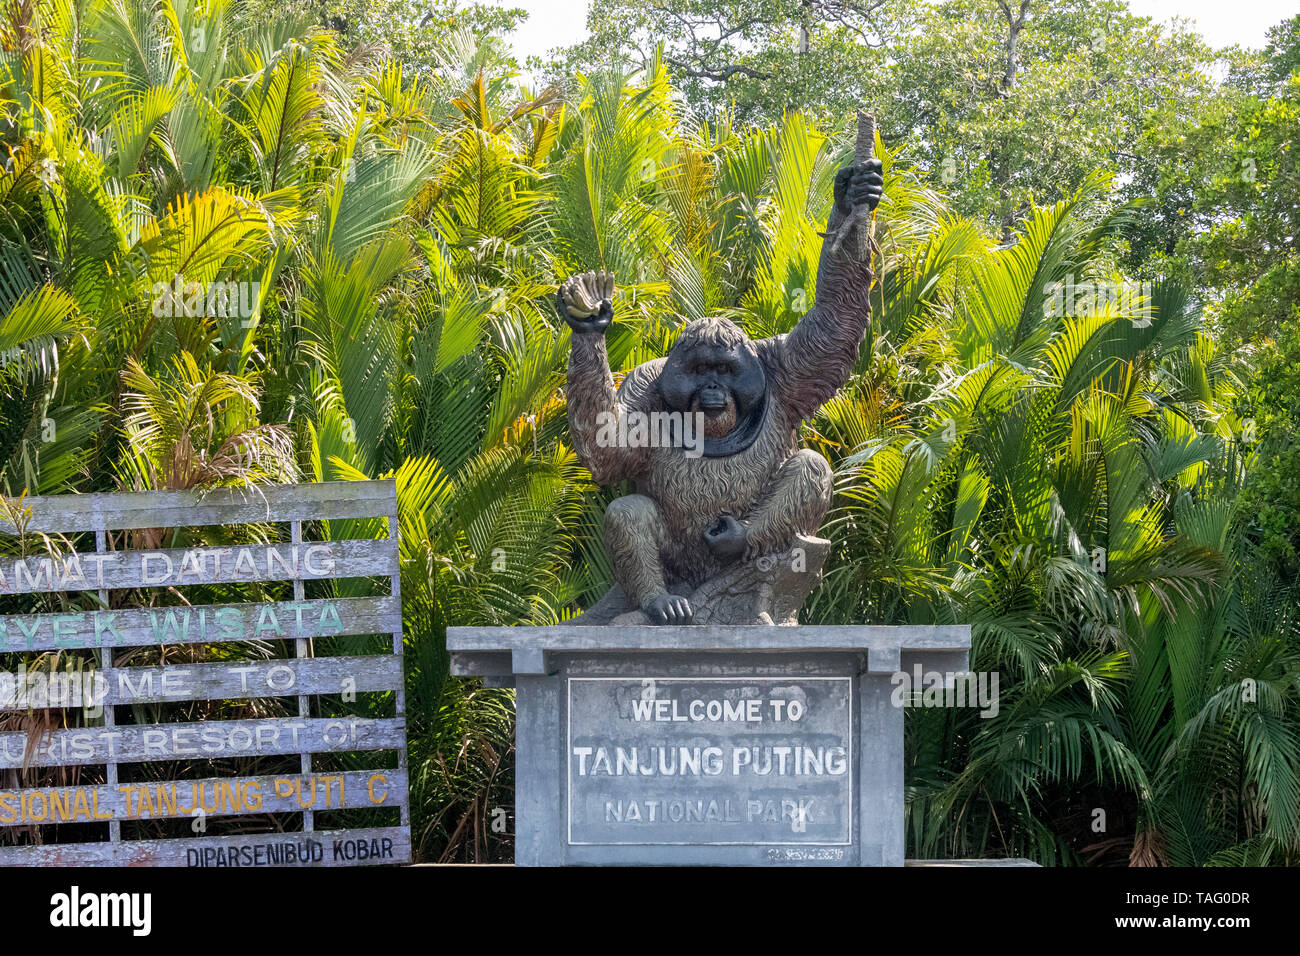 Tanjung Puting National Park, Sekonyer river, Sekonyer village, entrance of the National Park with an orang utan statue, Borneo, Indonesia Stock Photo